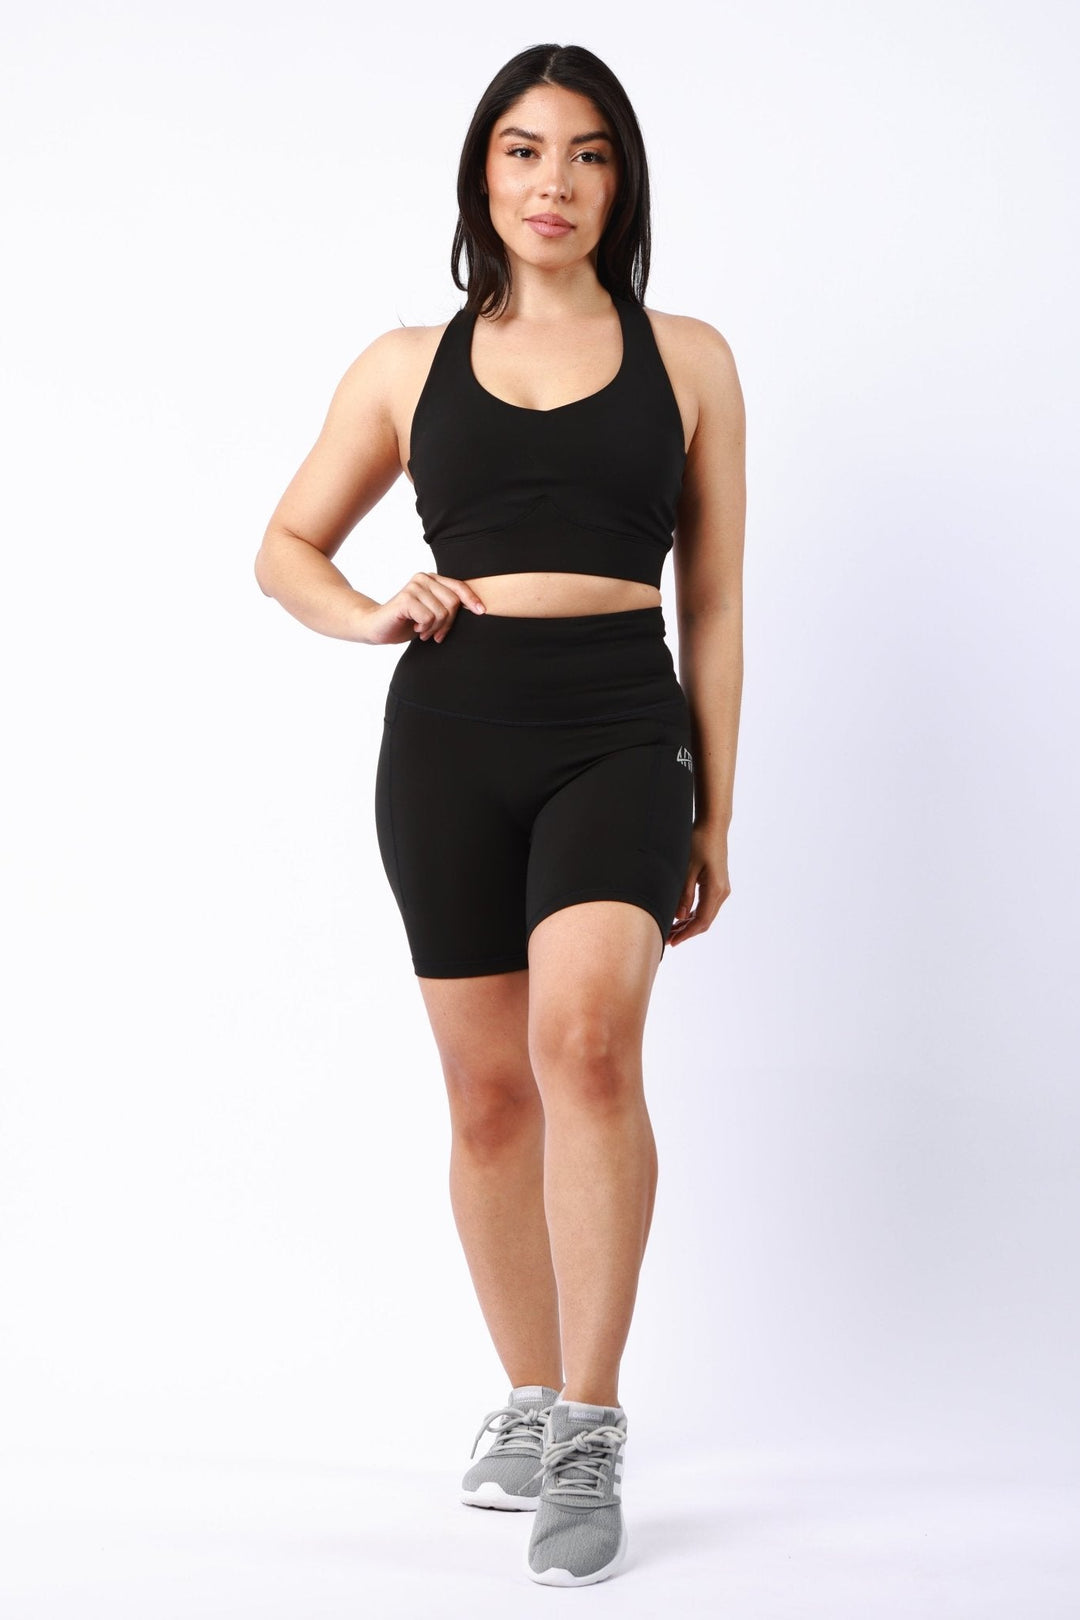 Athletic Women's Shorts With Pockets In Black - attivousa Free Shipping over $75 Womens Activewear Attivo